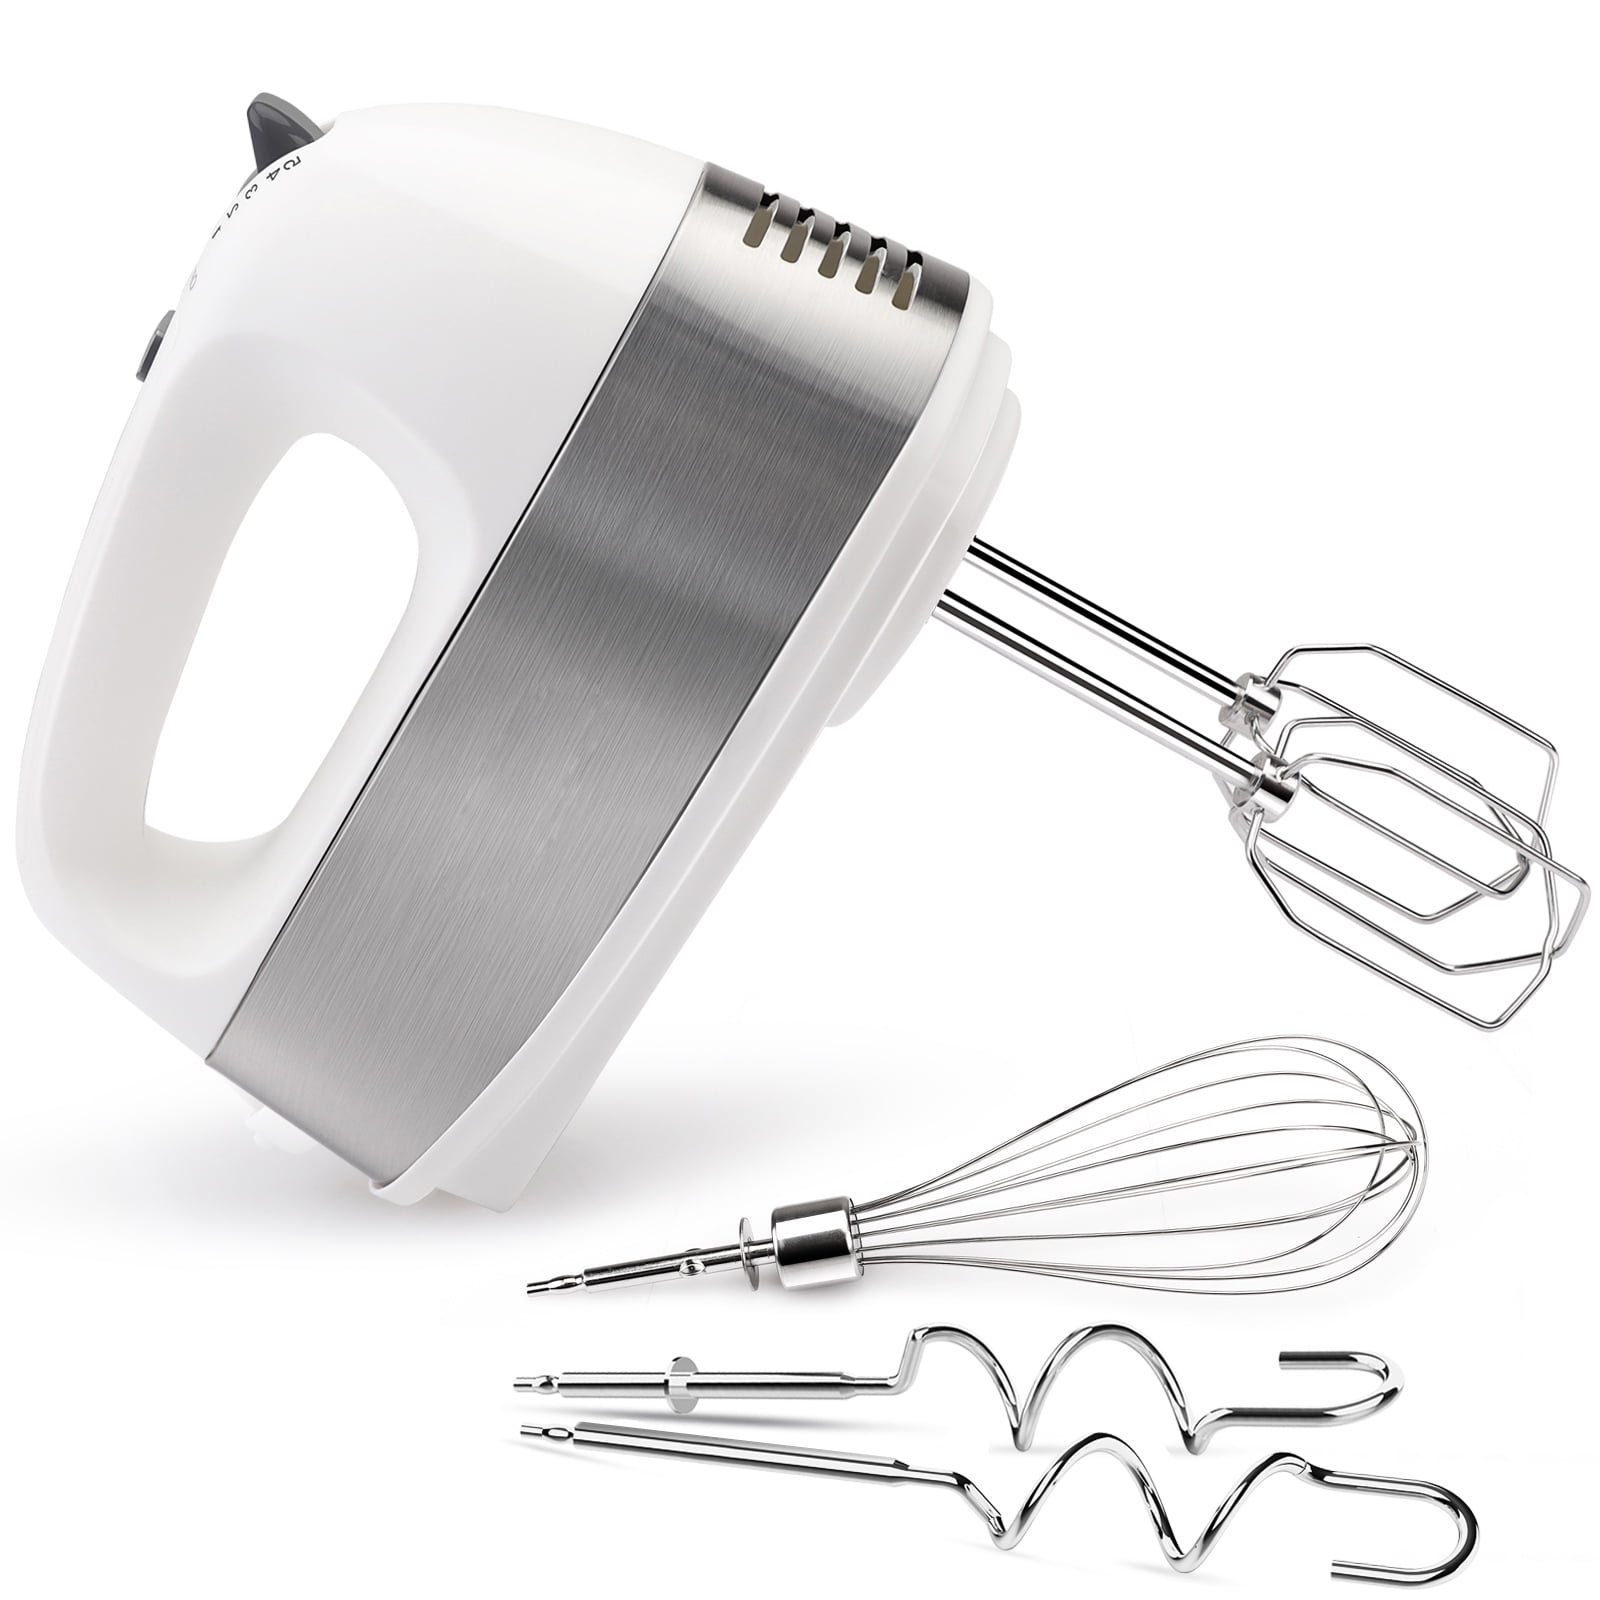 6-Speed Electric Hand Mixer With Storage Case Whisk And Bowl Rest White 250W New 